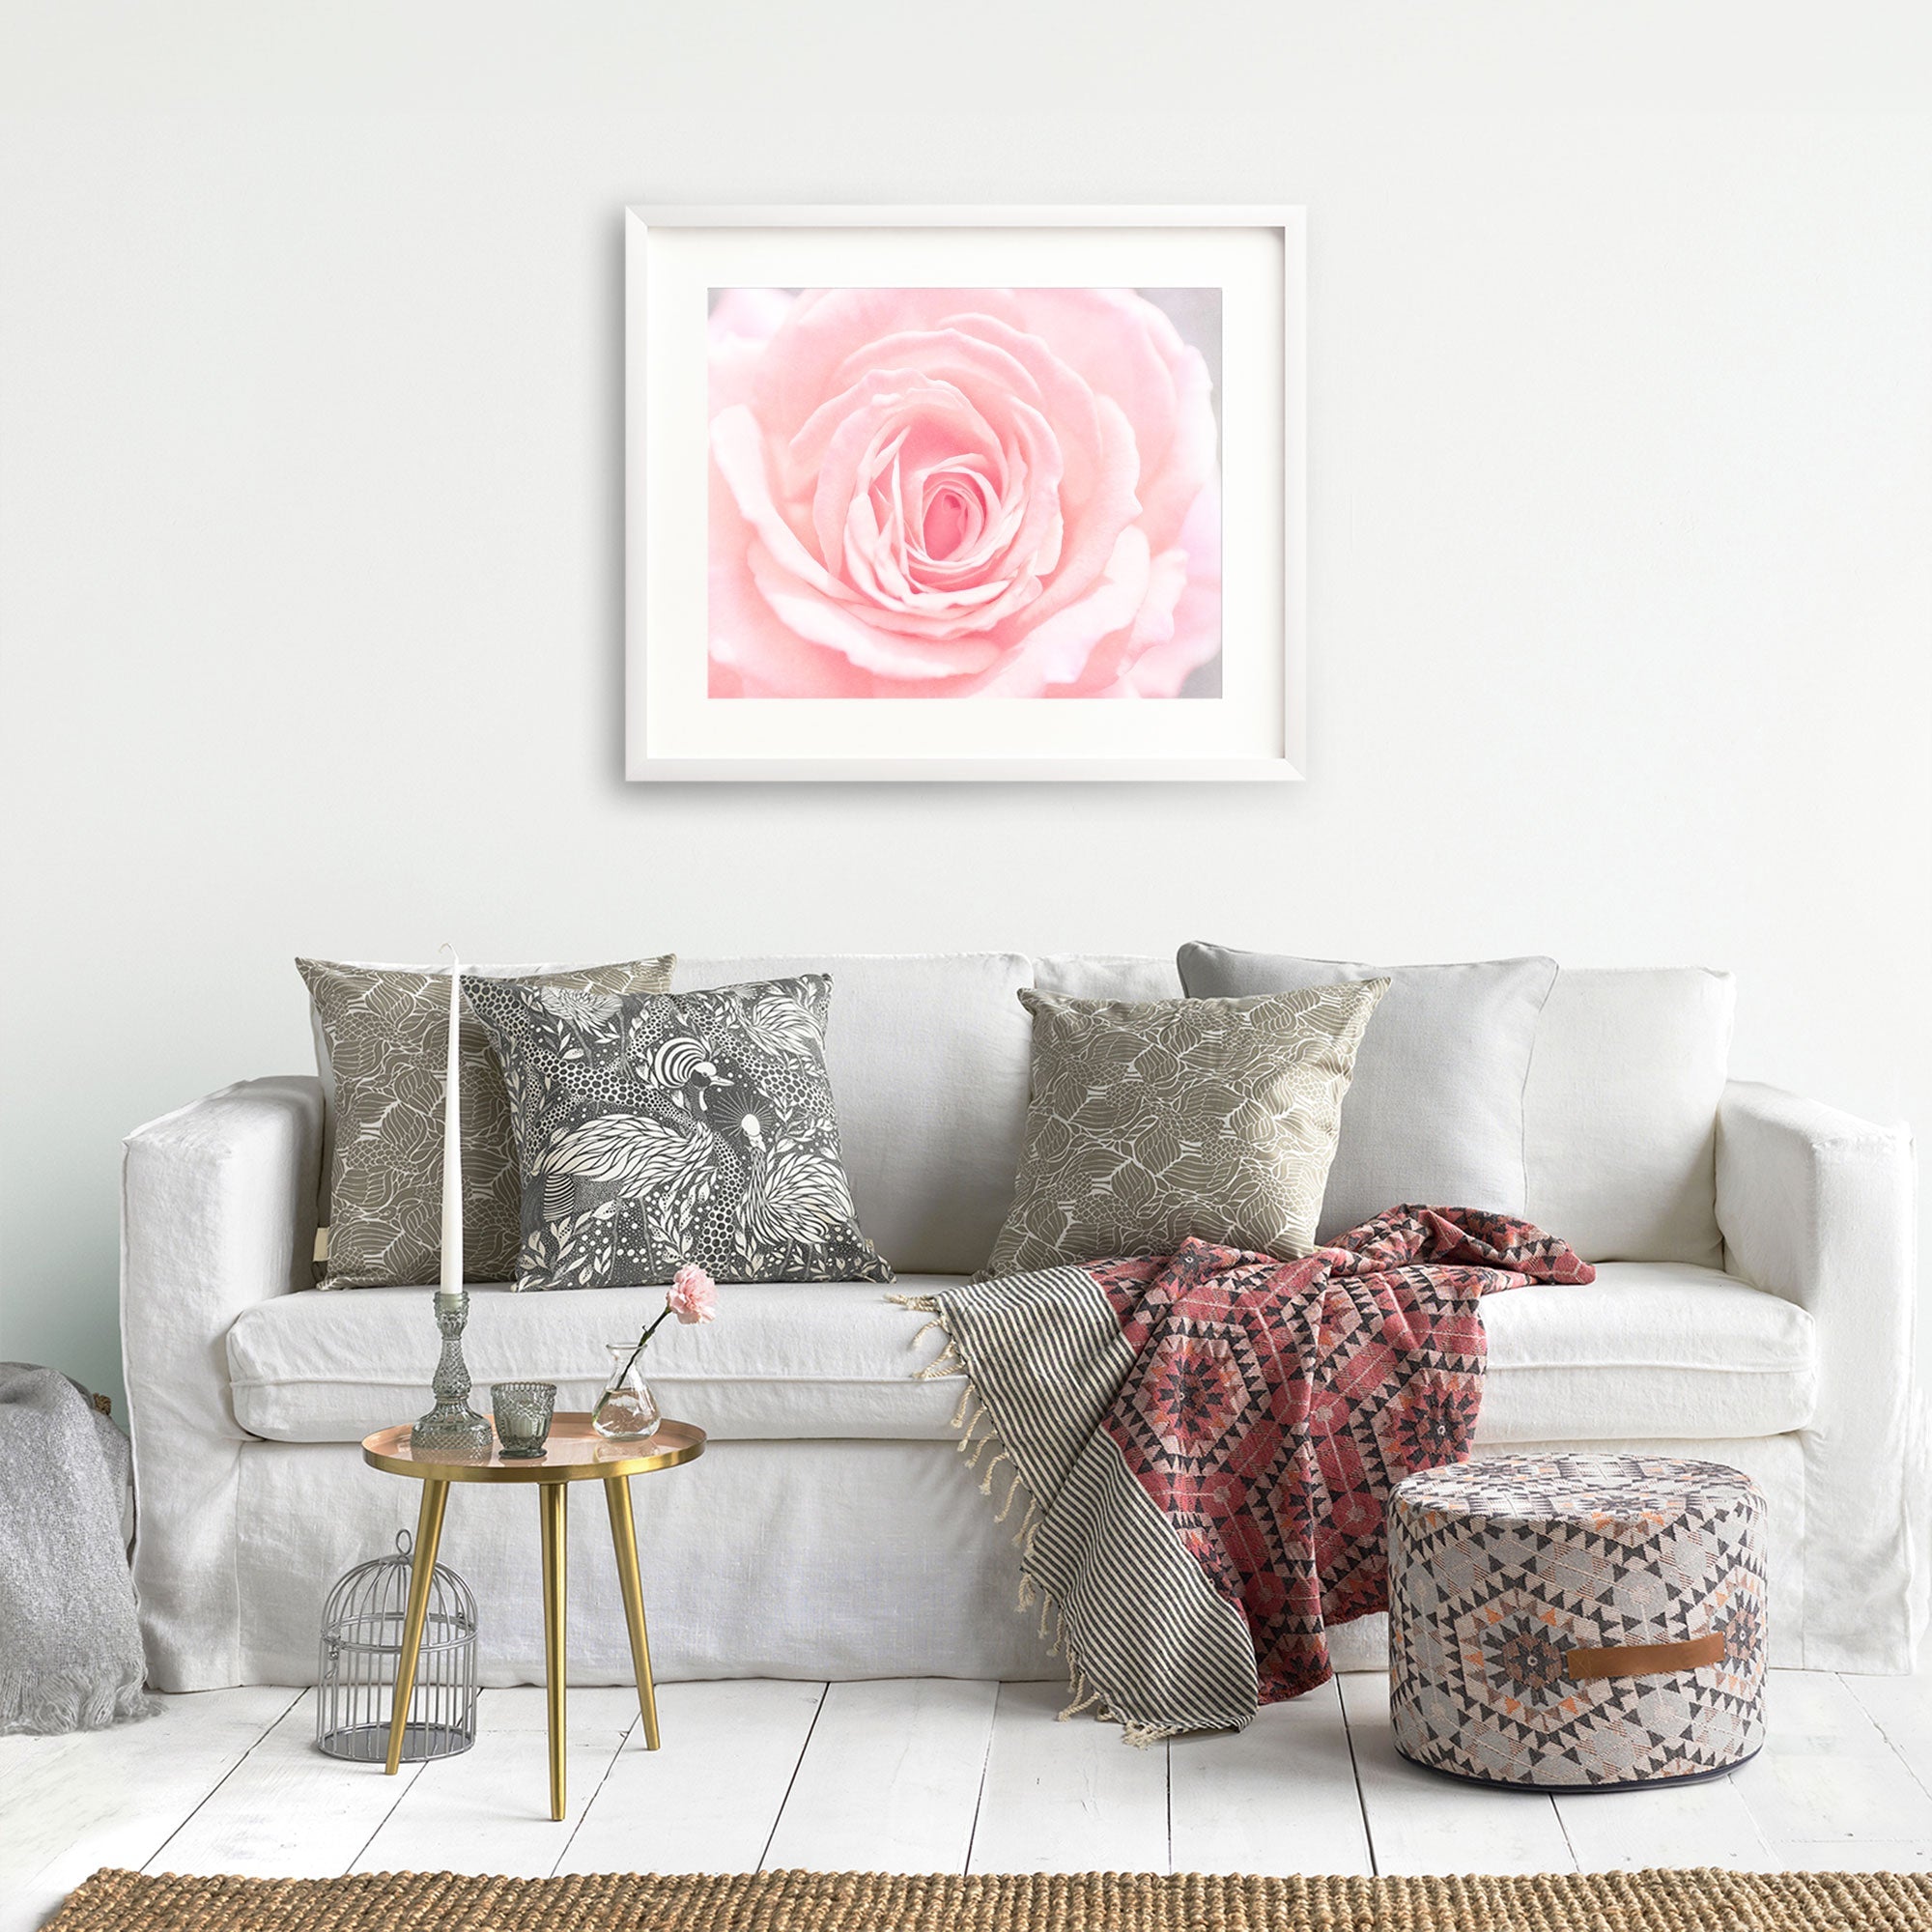 A cozy living room with a white sofa adorned with 'Pink Rose Print' cushions from Offley Green, a framed rose in bloom artwork above, a small gold side table, and a stylish ottoman. A red patterned throw is